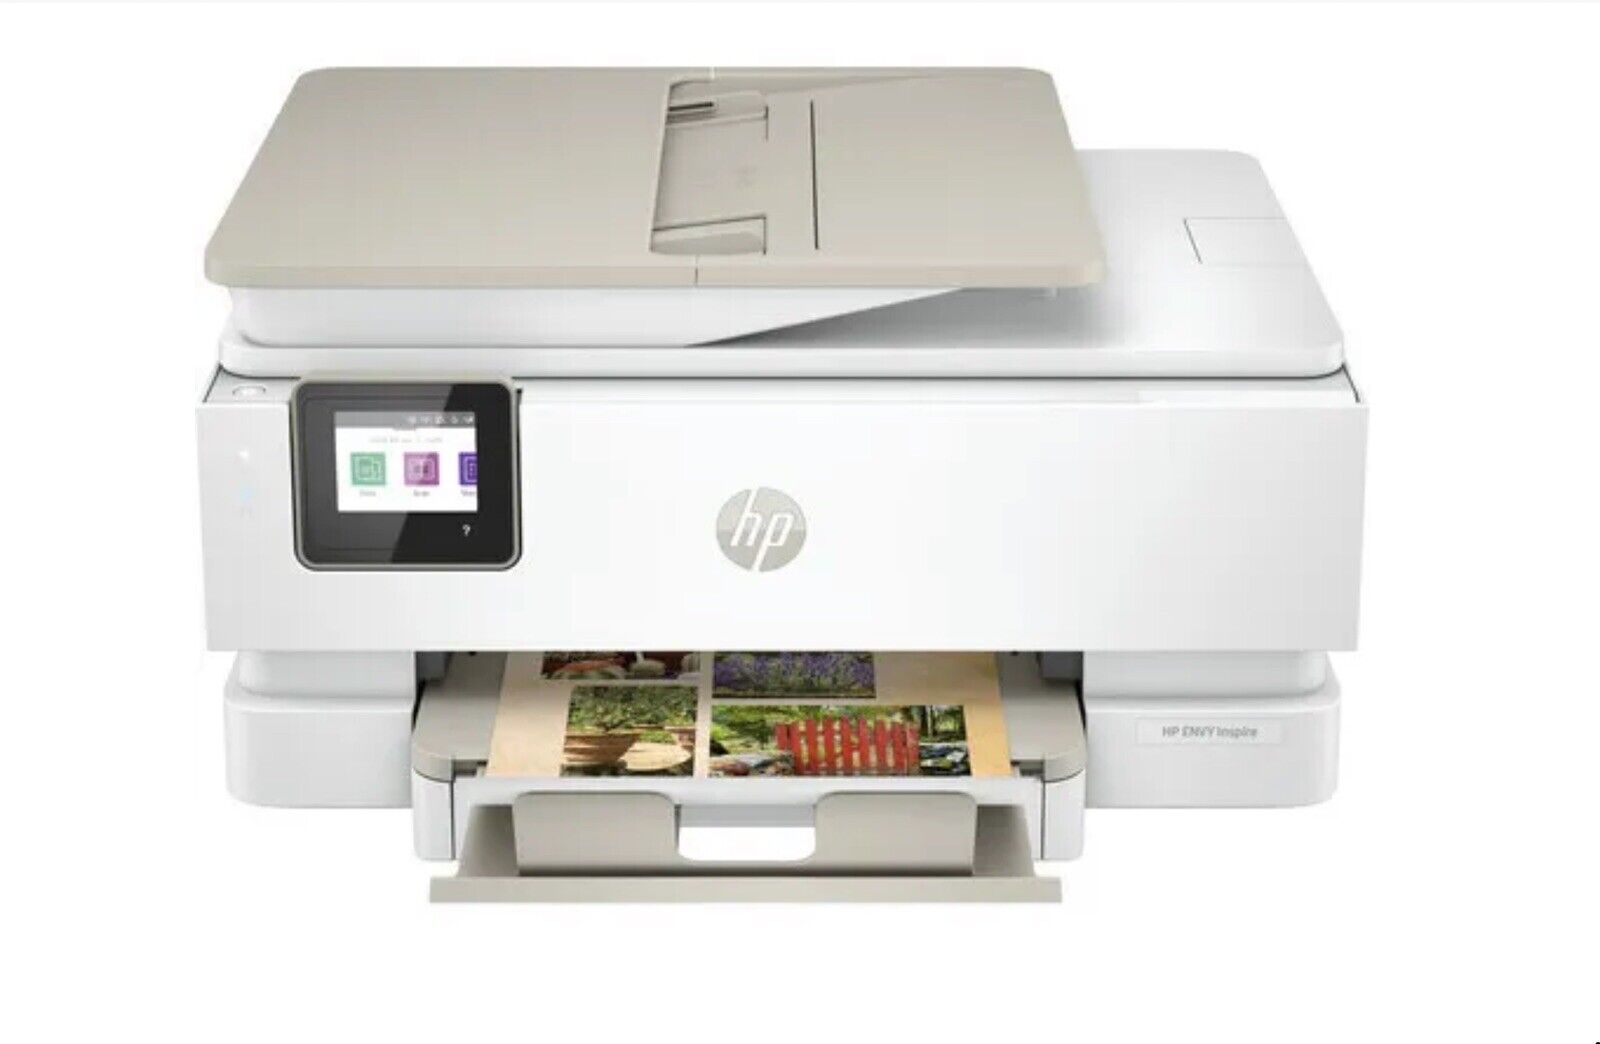 HP Envy Inspire 7955E | All-in-One Wireless Color Printer | Print, Copy, Scan